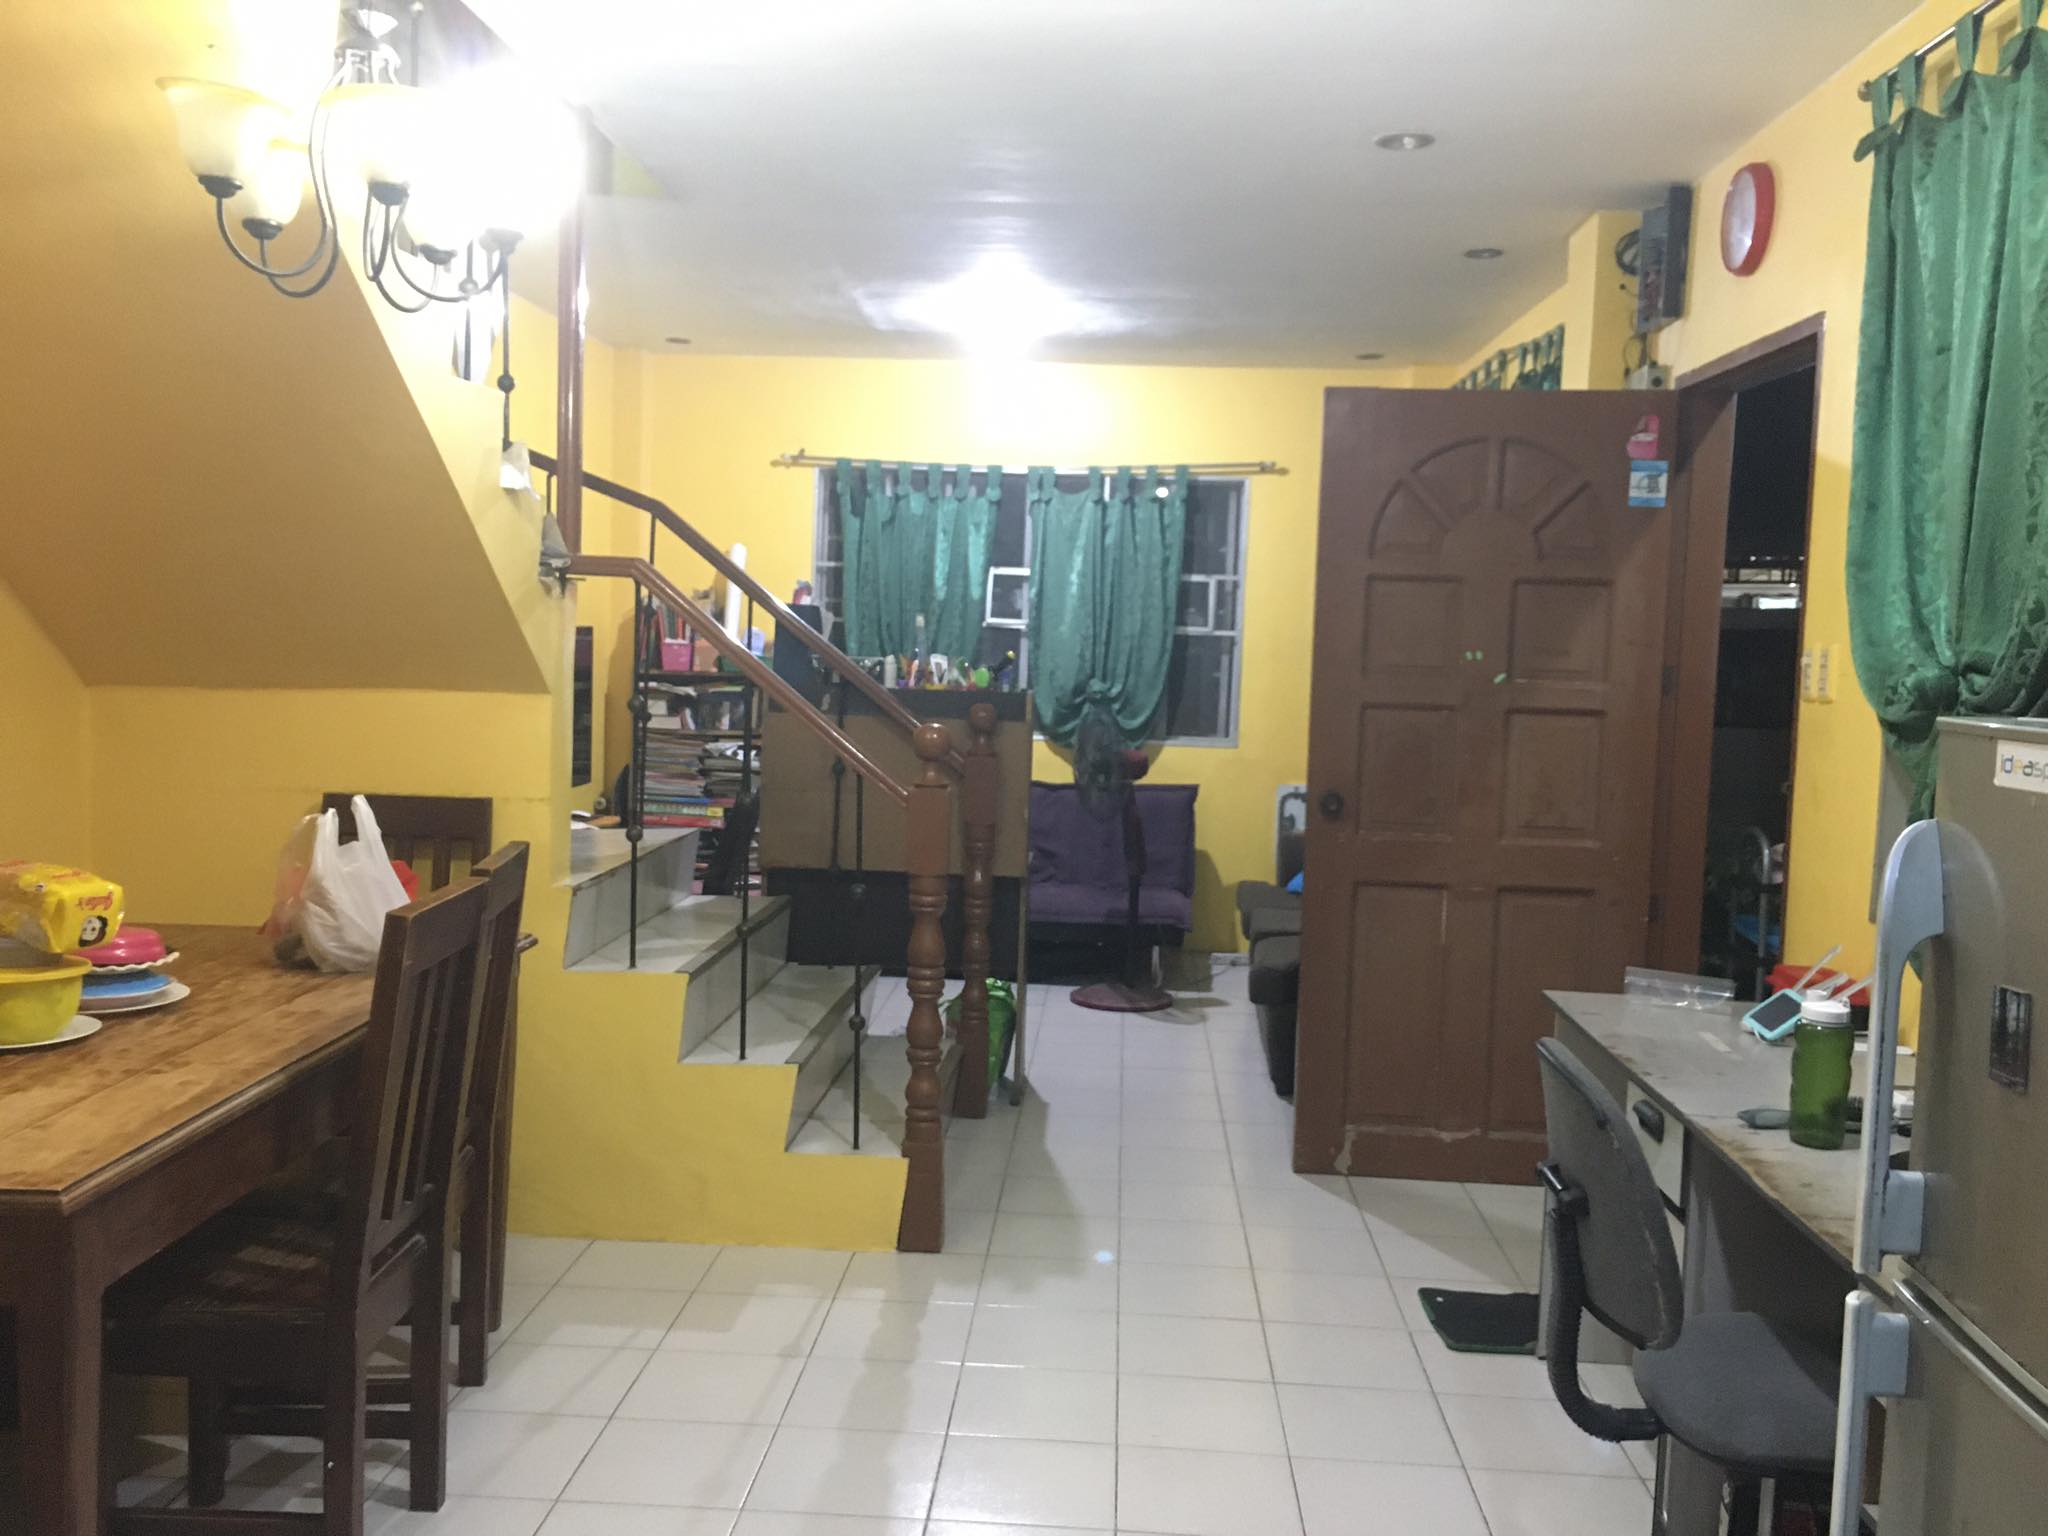 House and Lot in Pooc, Talisay City, Cebu